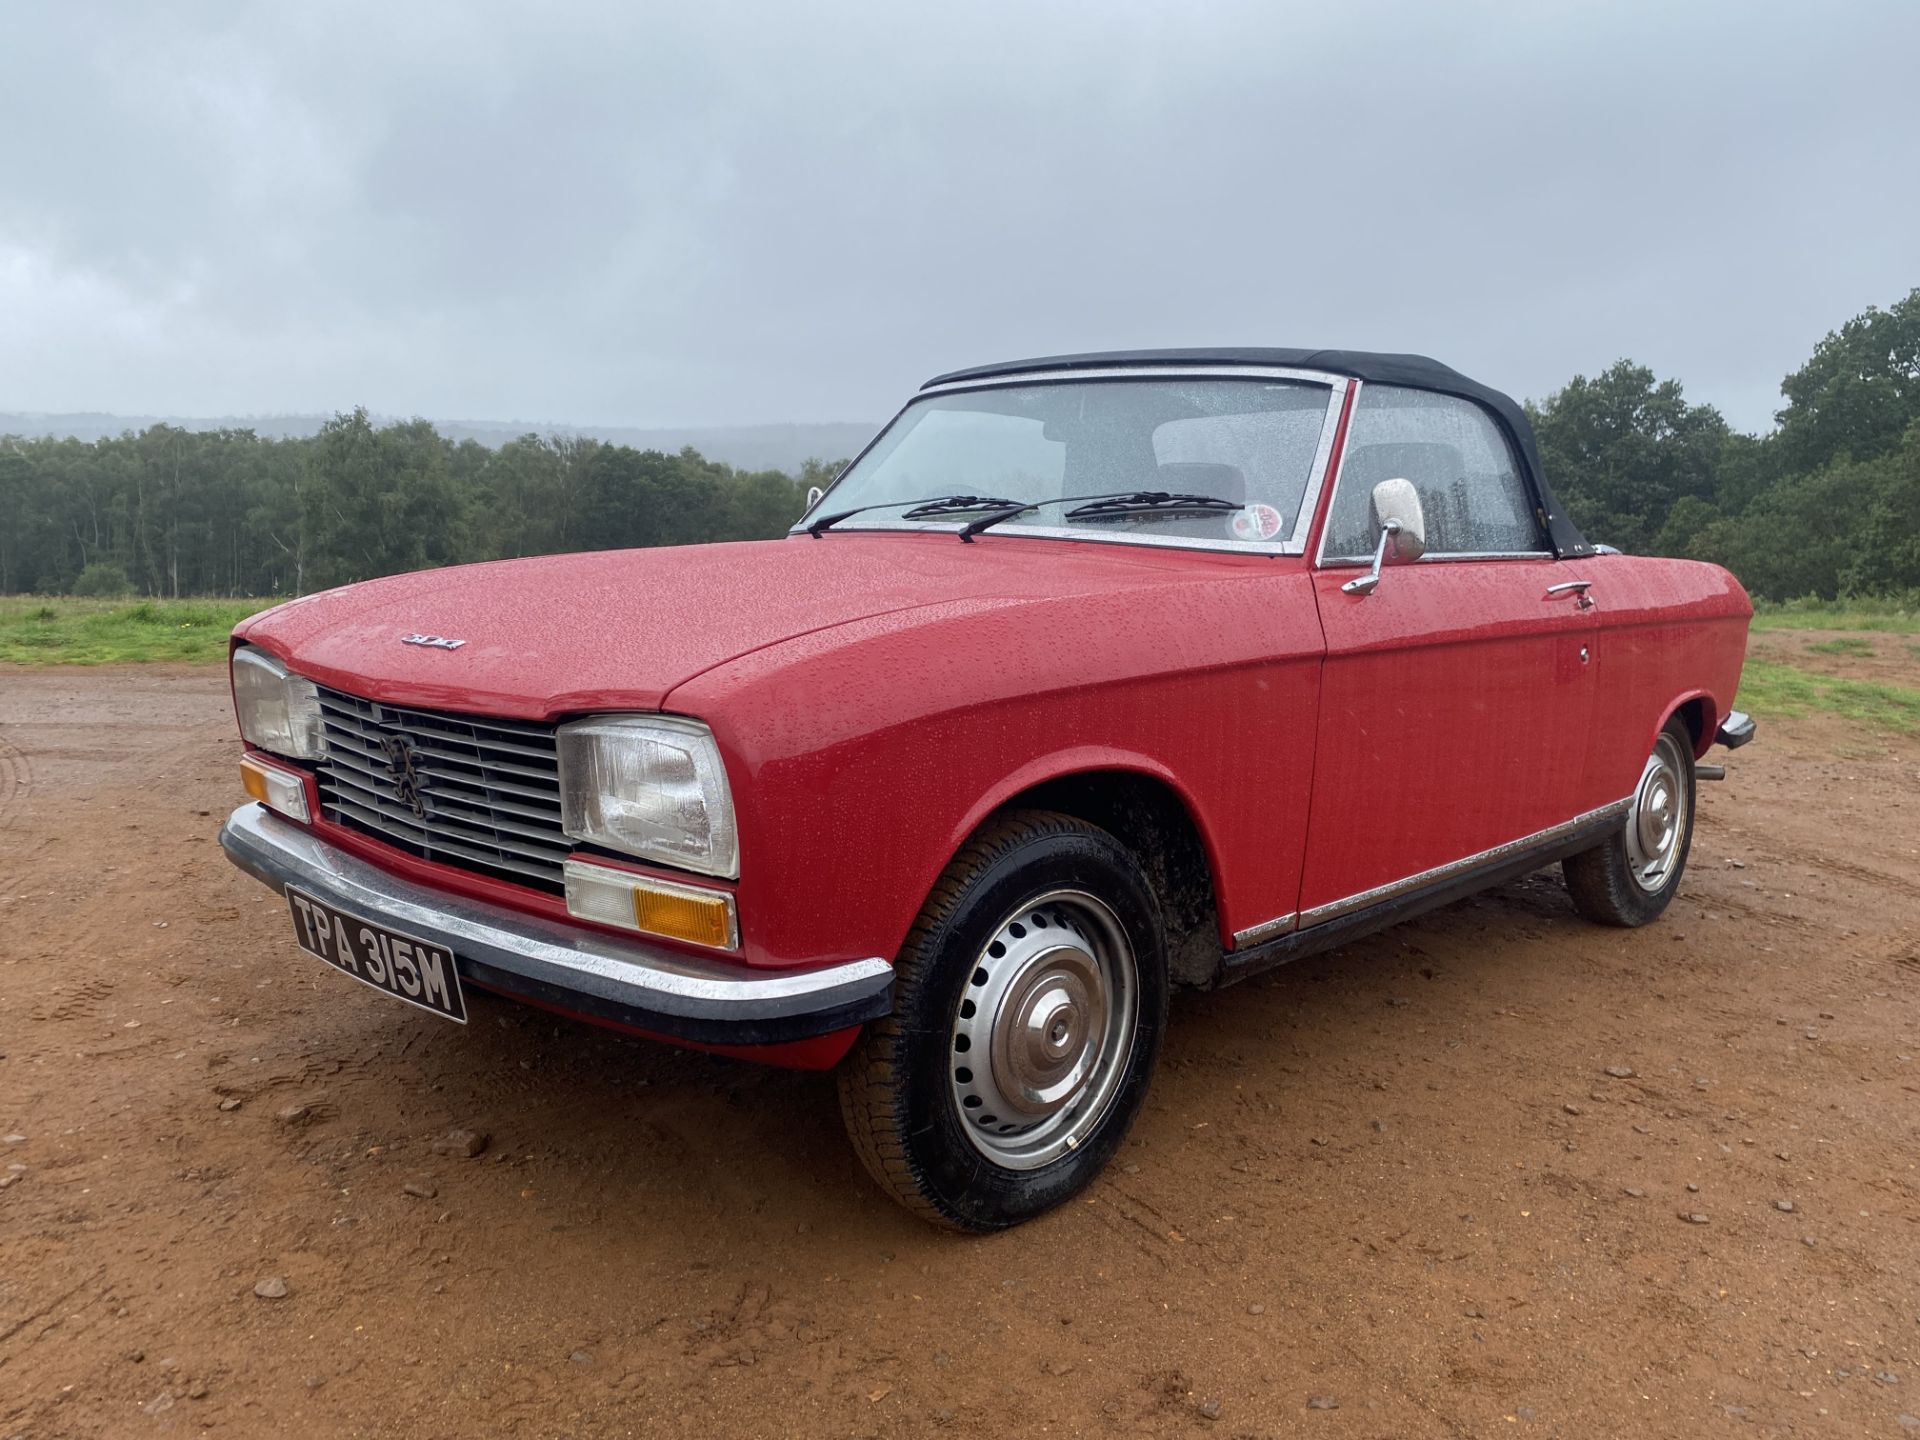 Peugeot 304 Convertible. Registration number: TPA 315M. Rare RHD drive model with 82,696 miles from